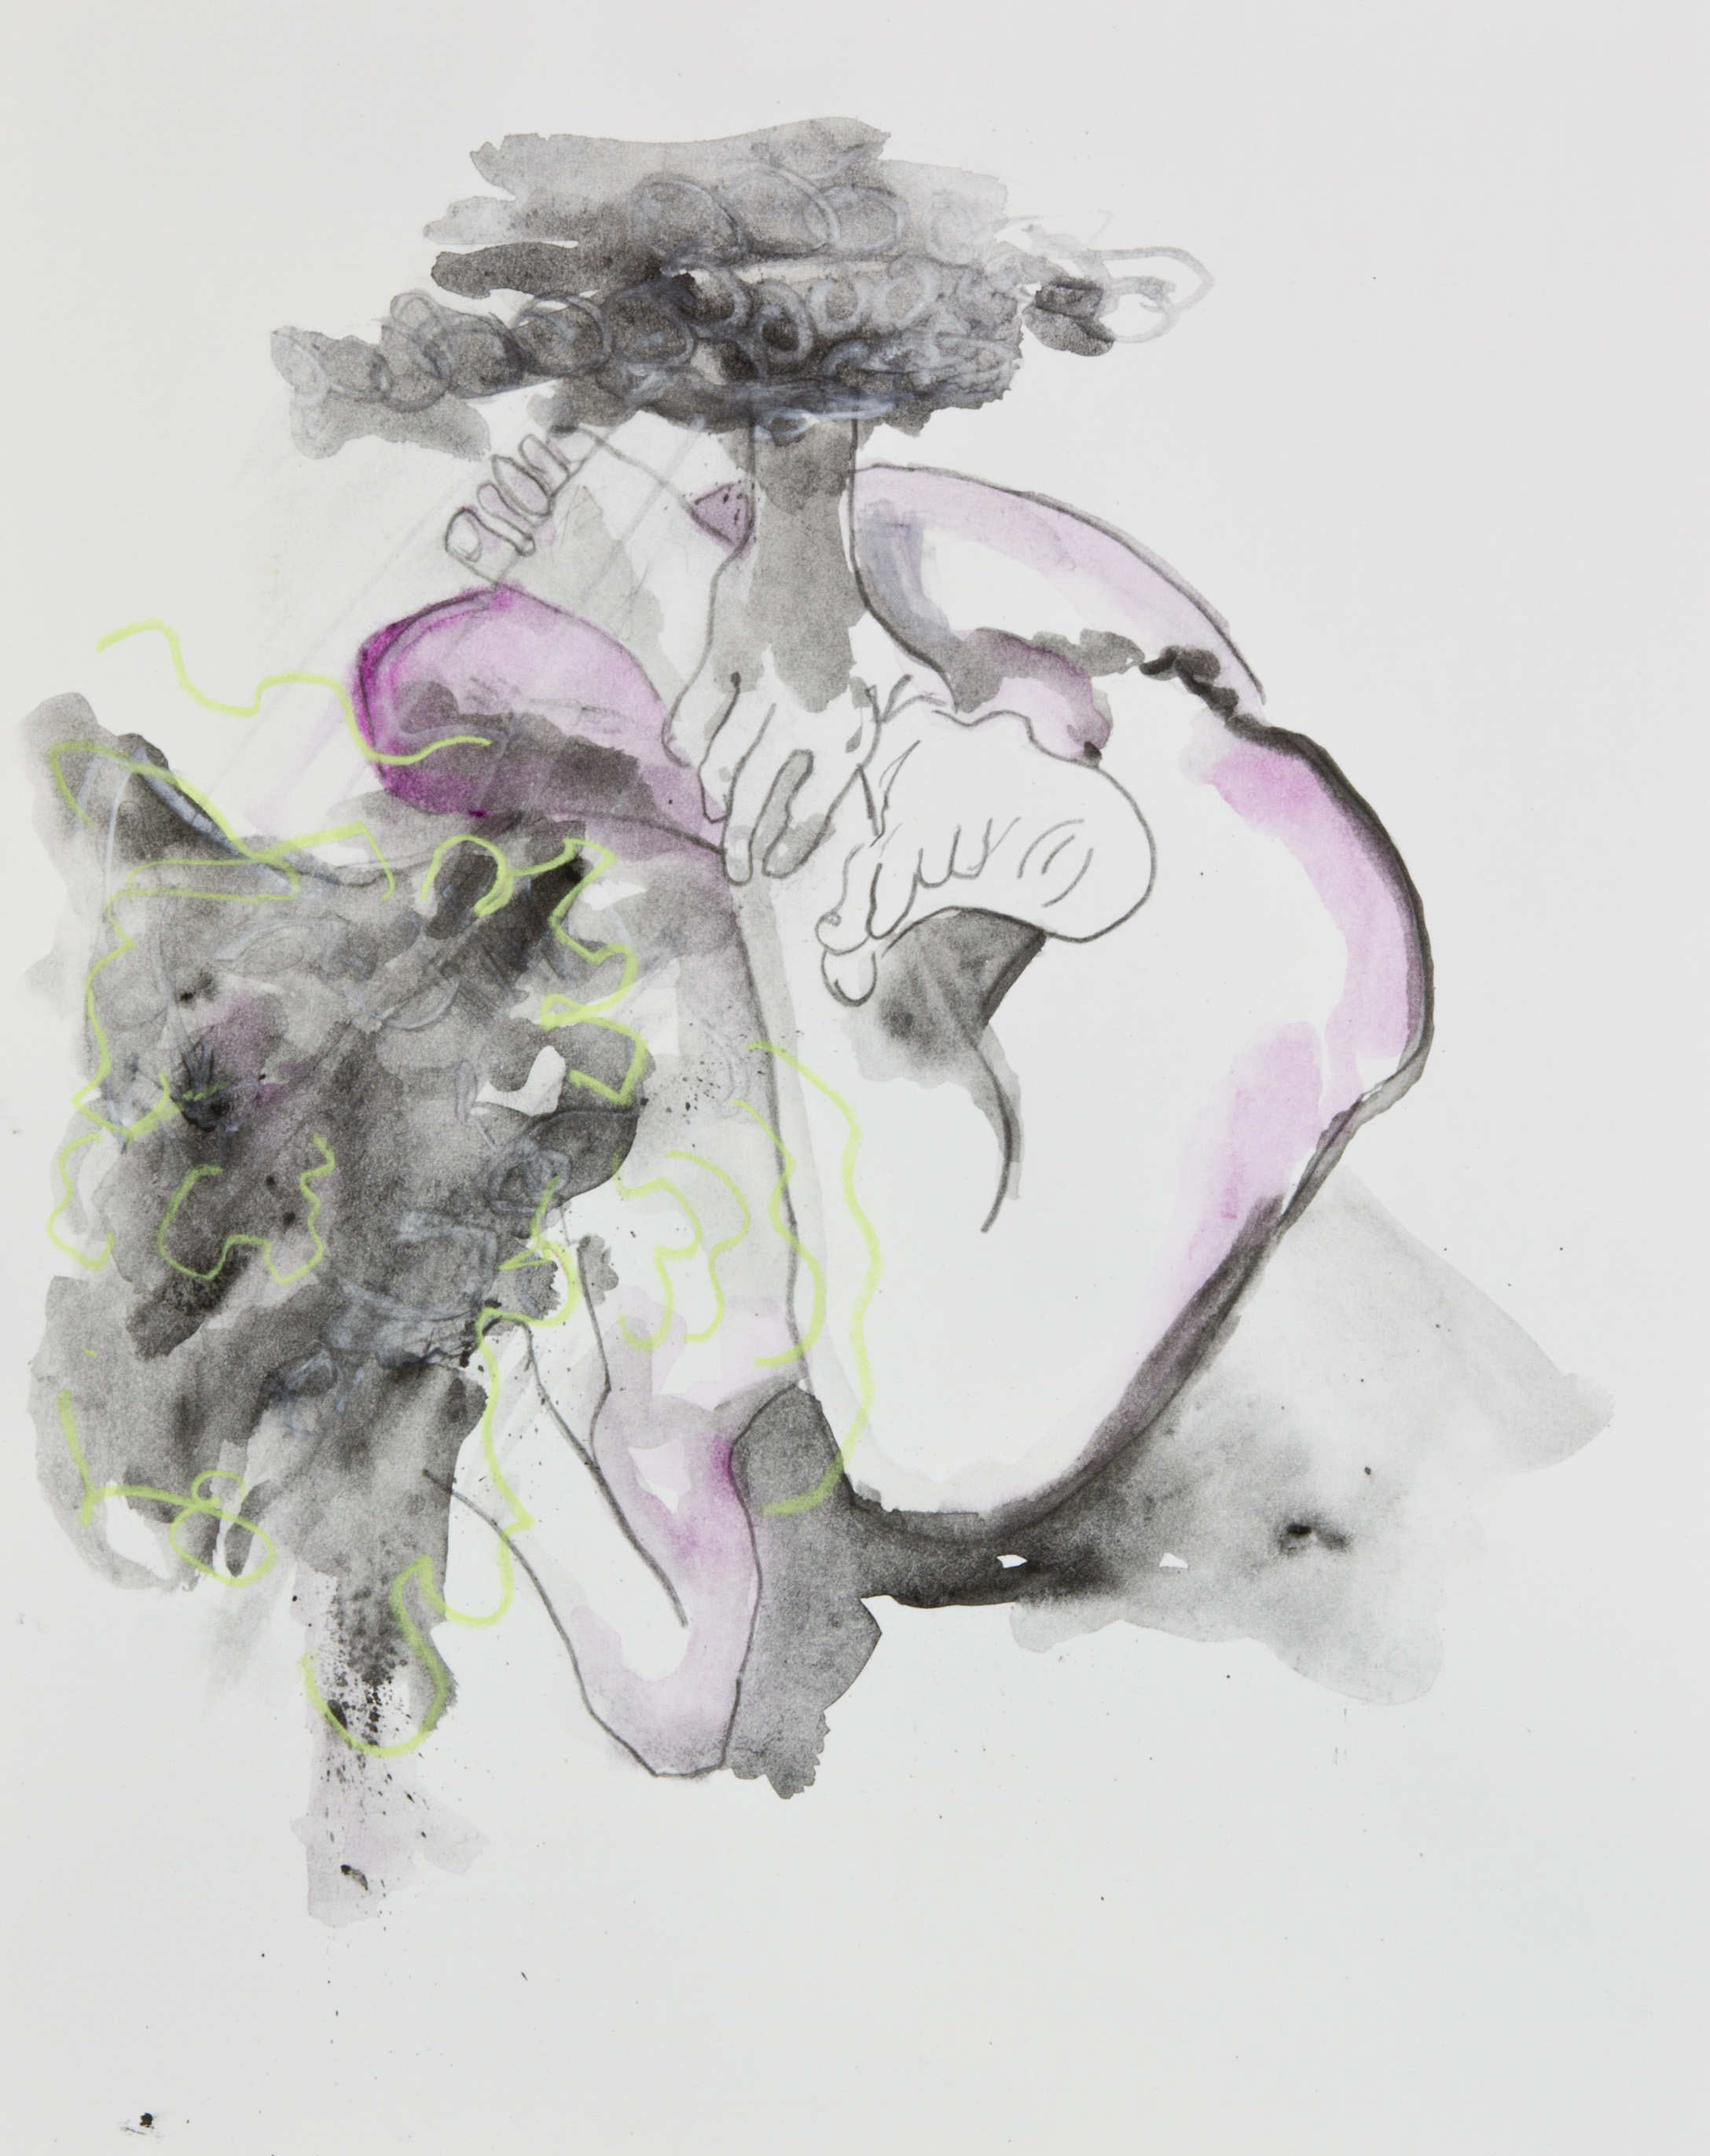 Unconscious Creation, 2013, graphite, crayon and watercolor pencil on paper, 11x14 inches